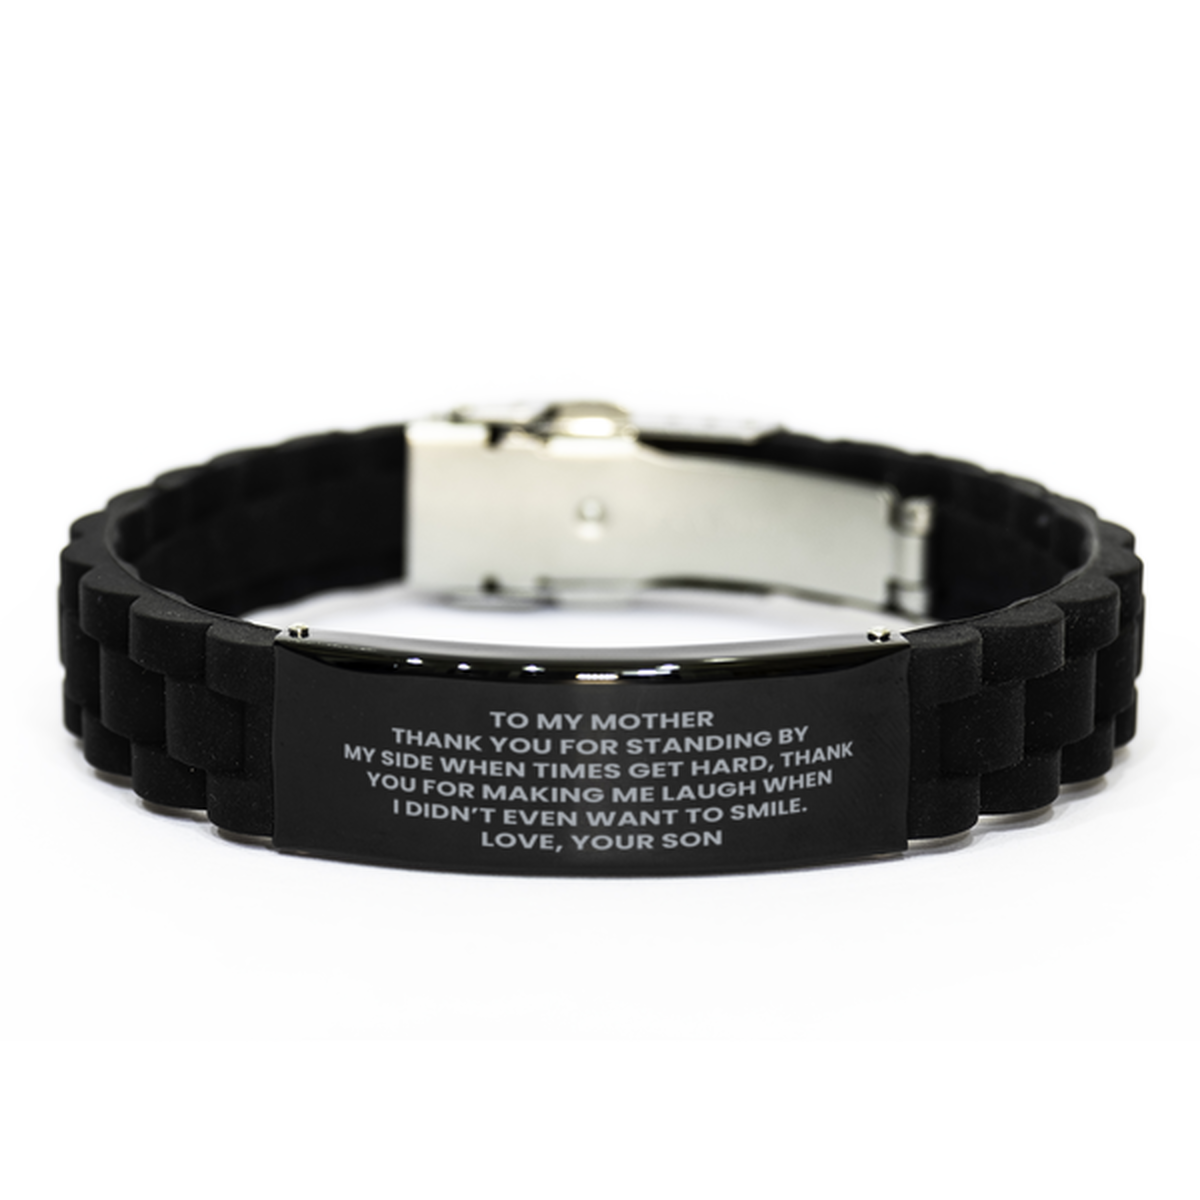 To My Mother Black Bracelet, Thank You For Standing By My Side, Mothers Day Gifts For Mother From Son, Birthday Gifts For Women